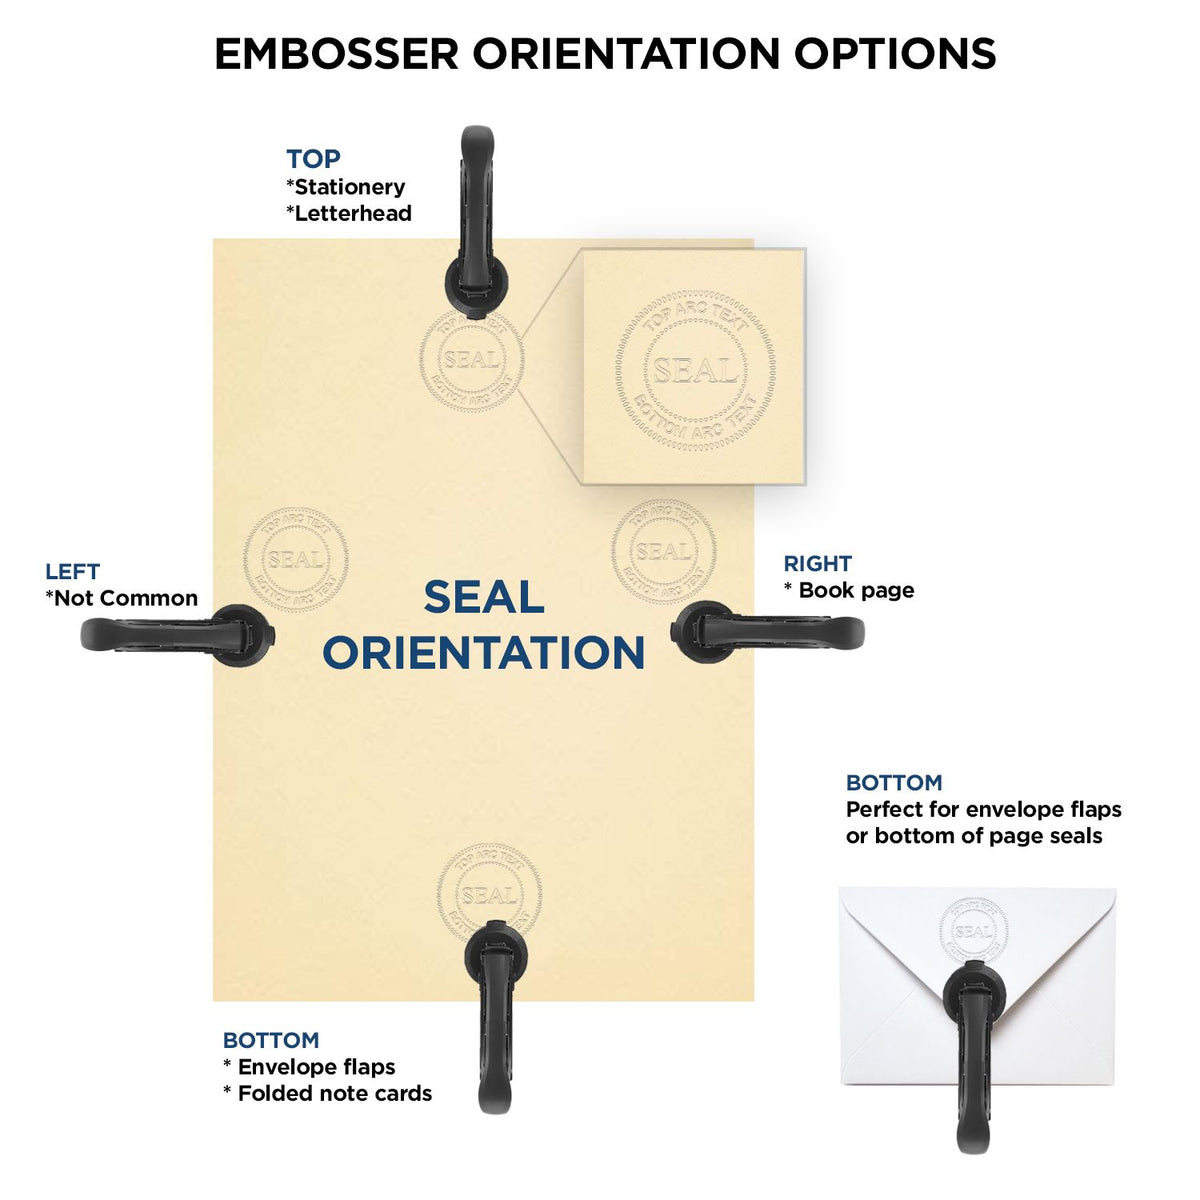 An infographic for the Soft Pocket Montana Landscape Architect Embosser showing embosser orientation, this is showing examples of a top, bottom, right and left insert.